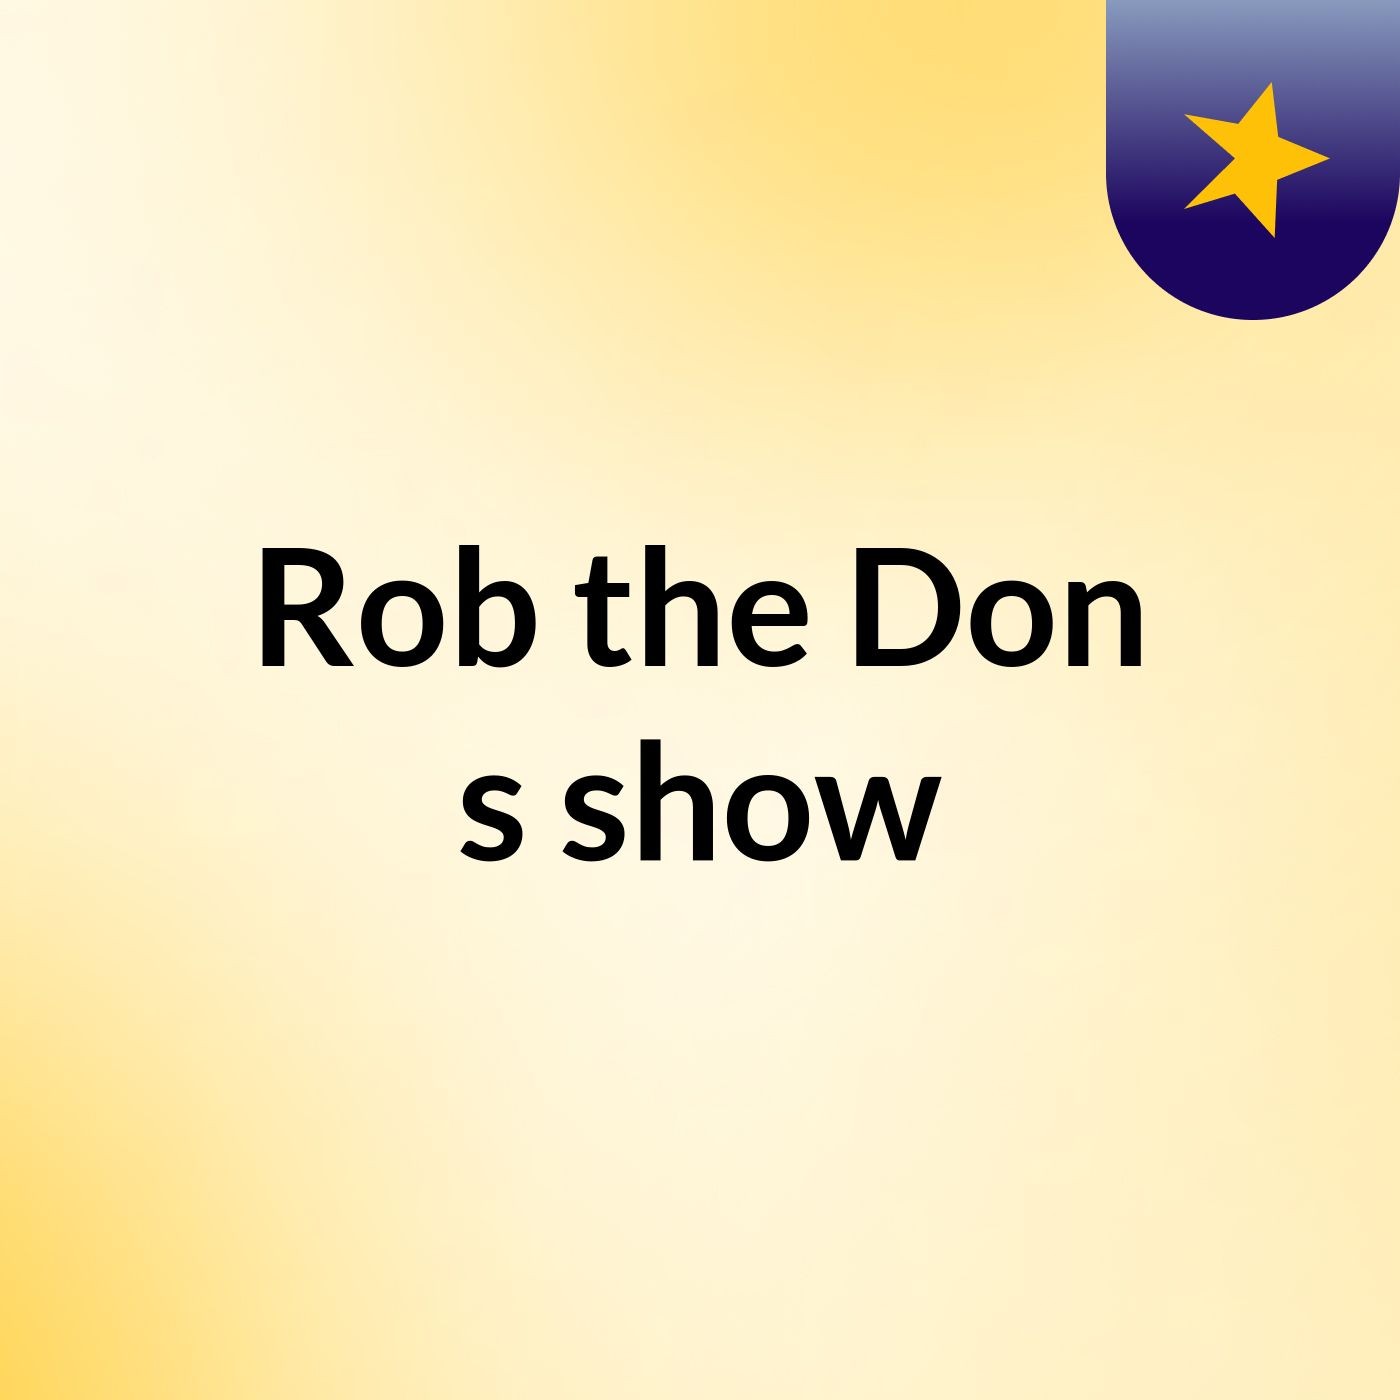 Rob the Don's show